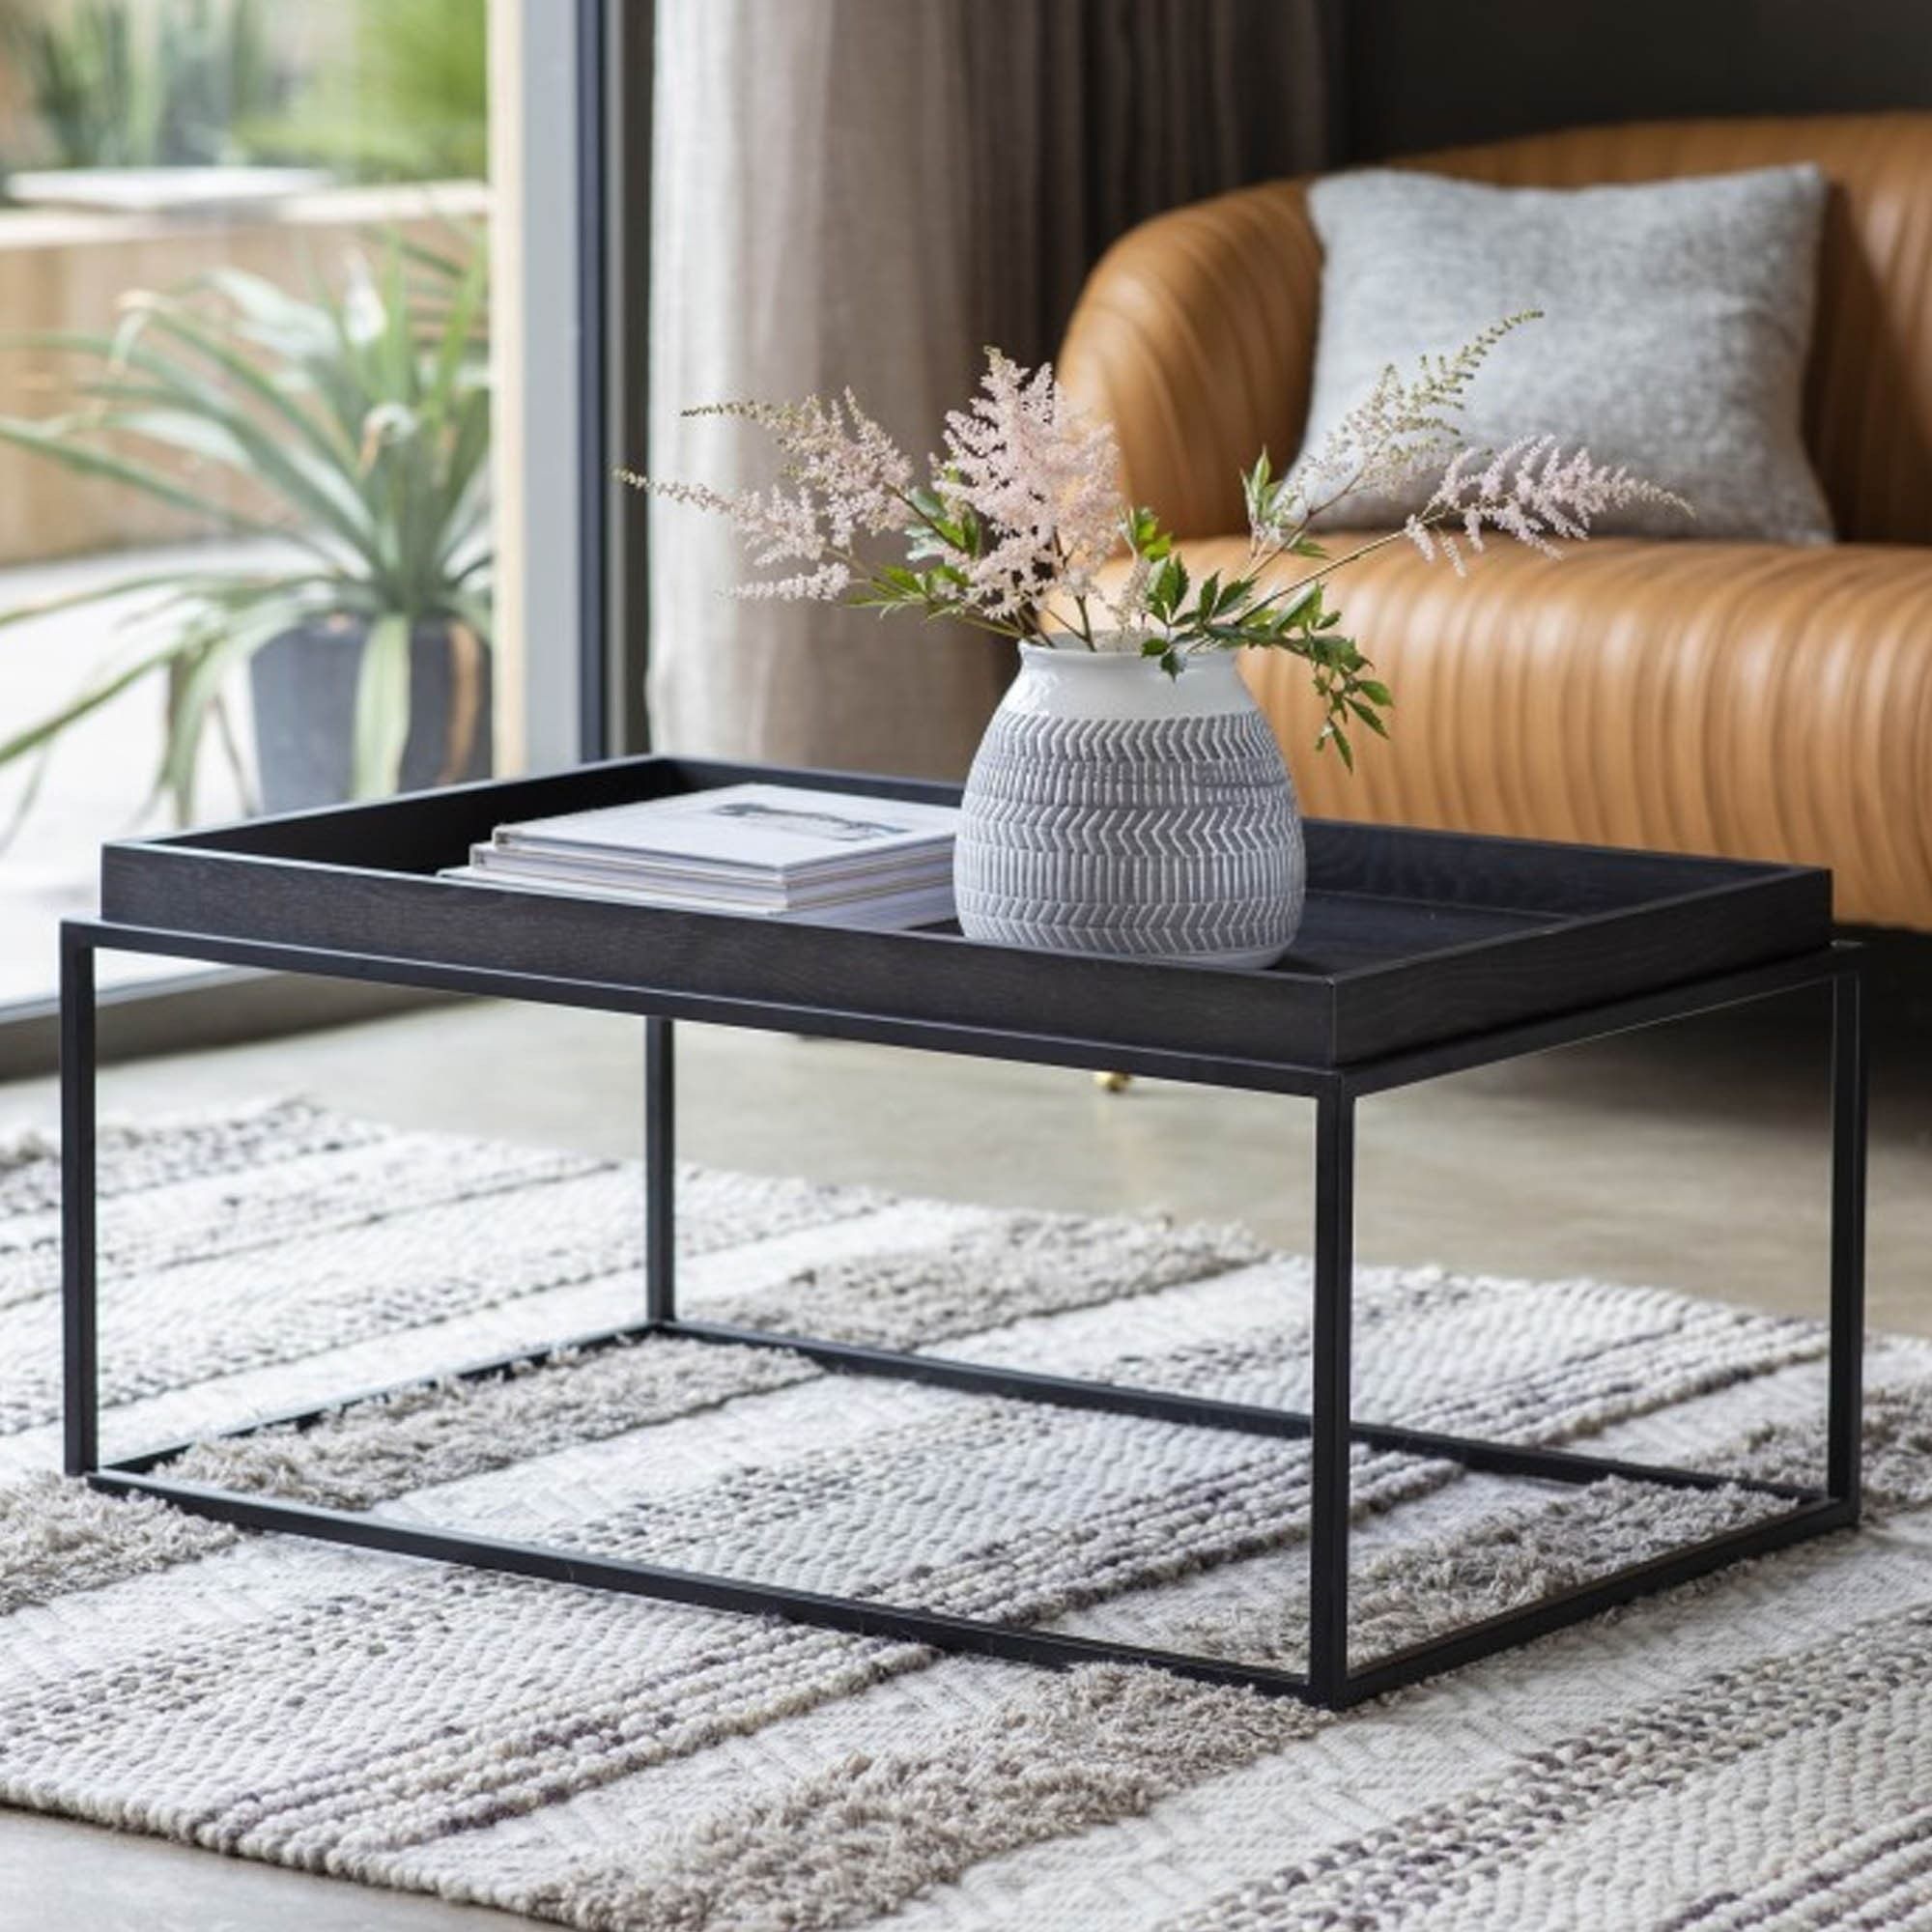 Forden Tray Coffee Table Black | Modern Coffee Table | Industrial With Coffee Tables With Trays (View 13 of 20)